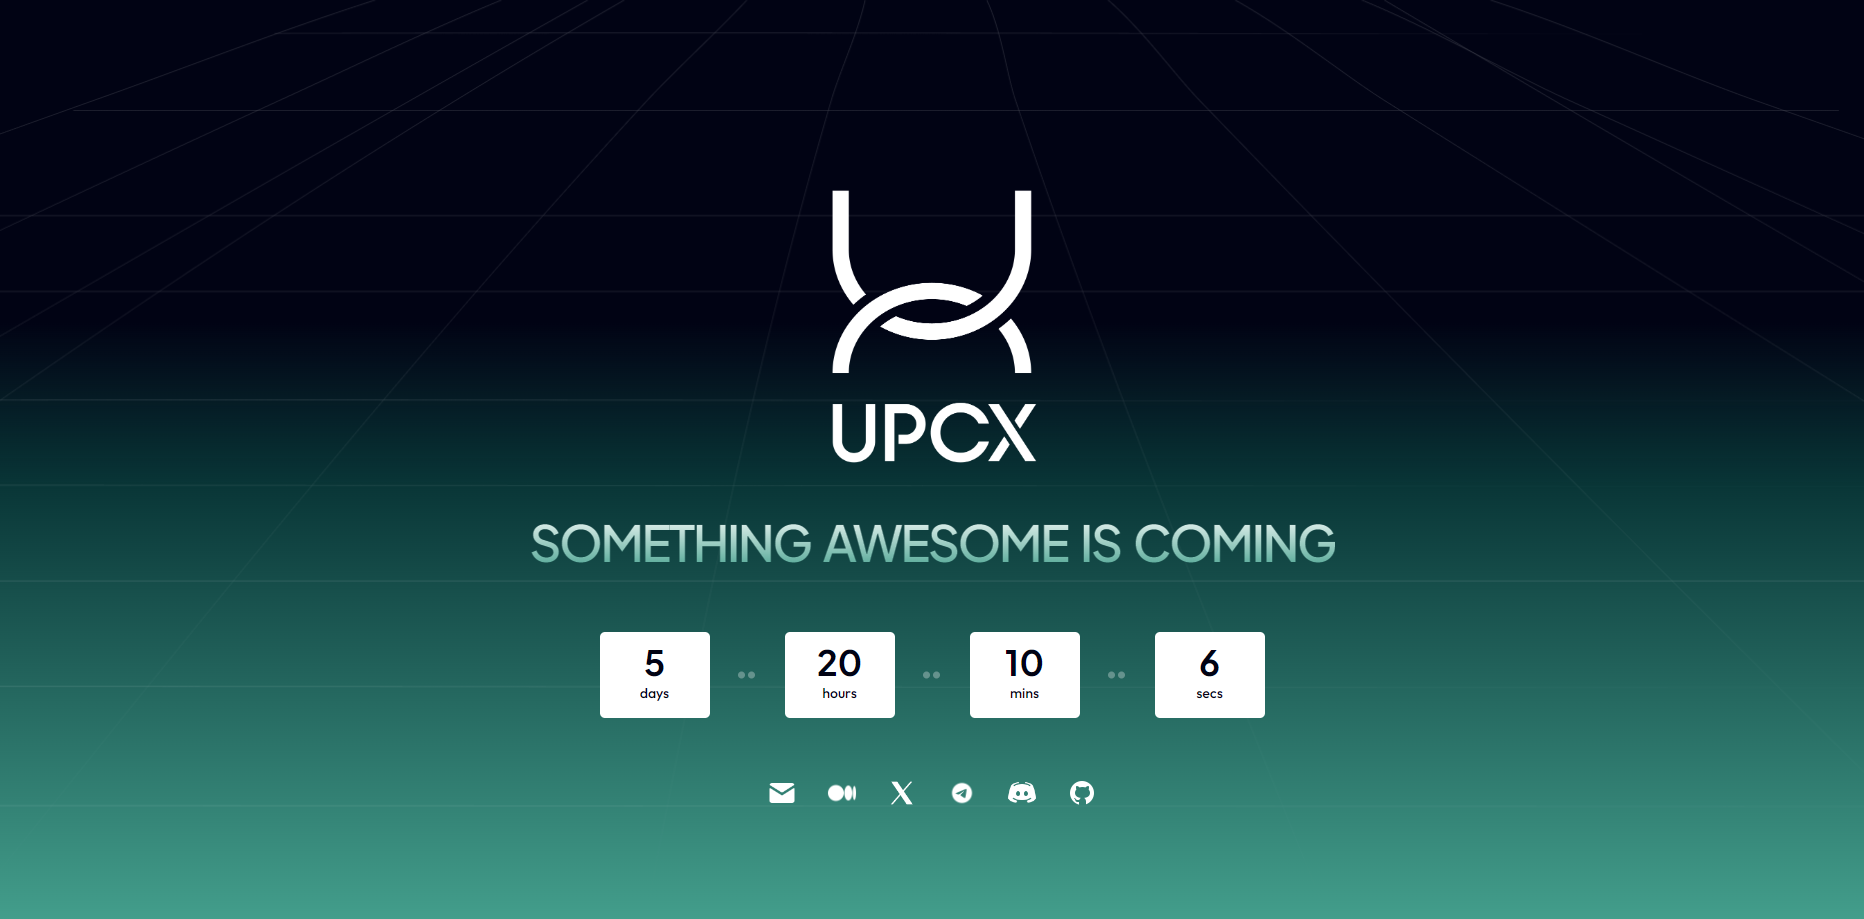 UPCX is about to launch a brand new Staking service.